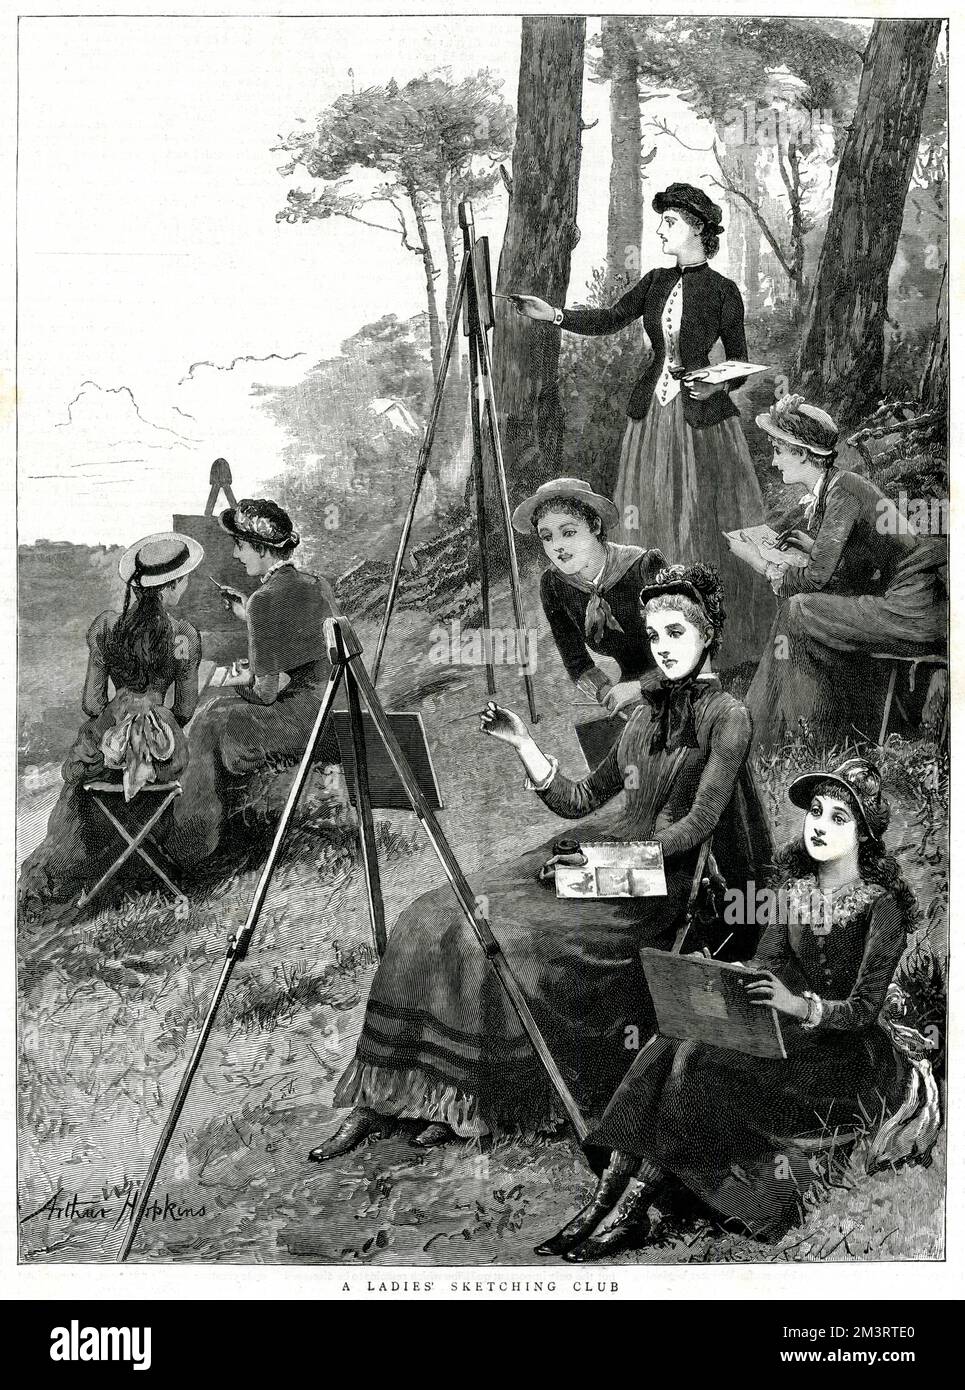 Group of women sketching the scenery on their easels.     Date: 1885 Stock Photo